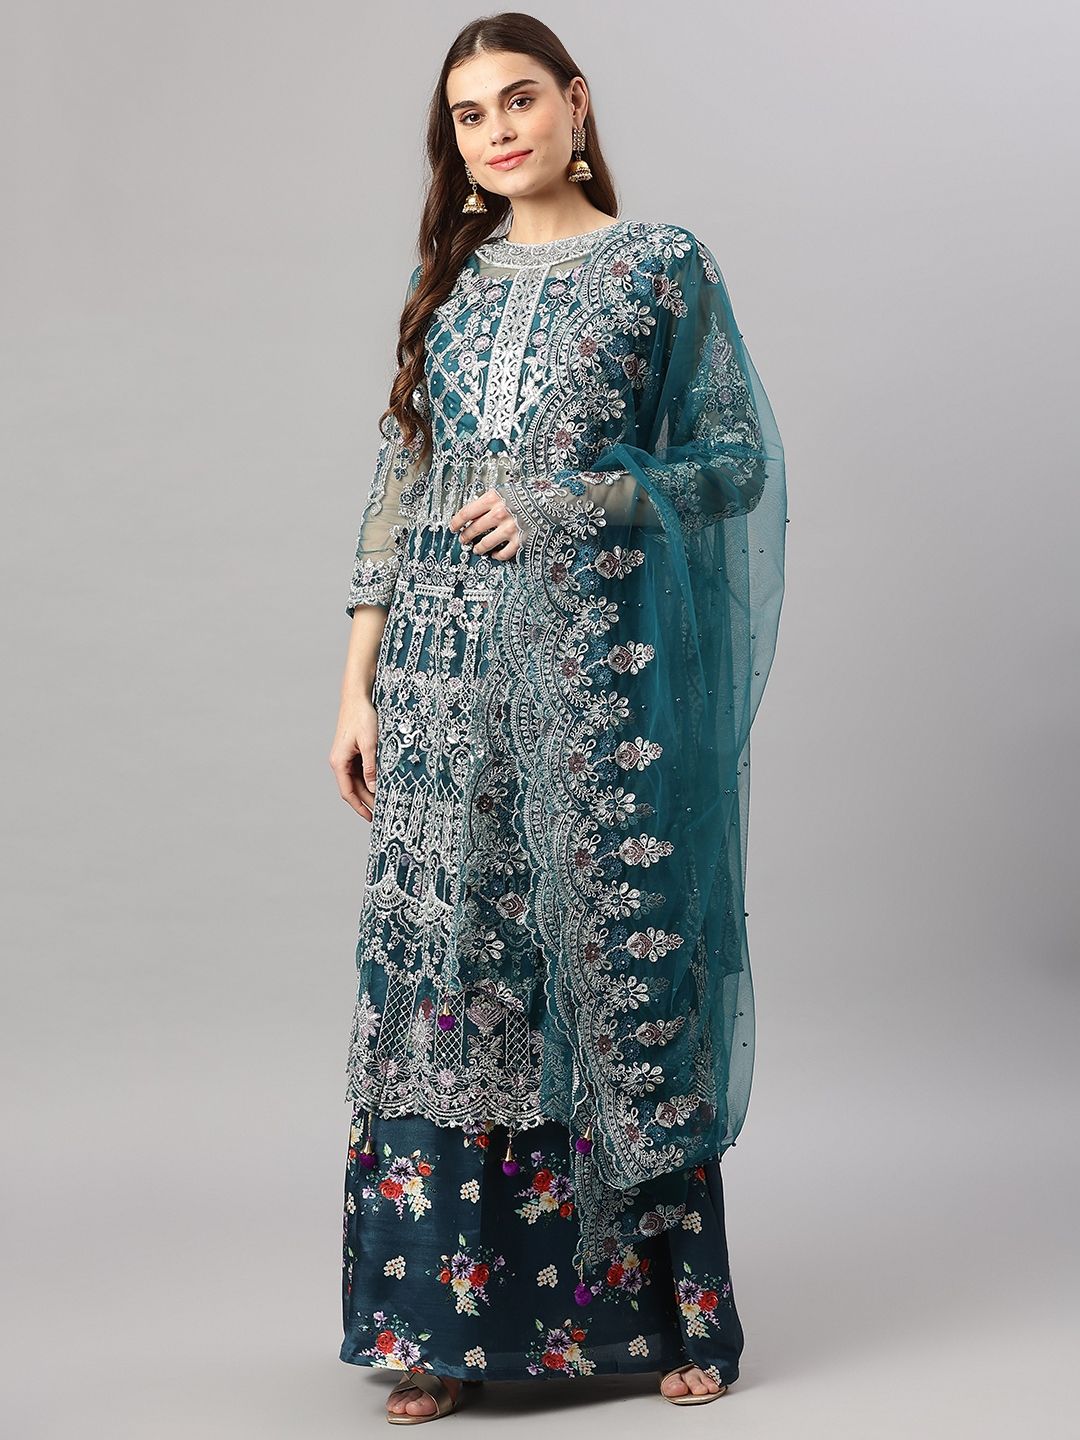 Readiprint Fashions Teal Blue & Silver-Toned Embroidered Anarkali Dress Material Price in India